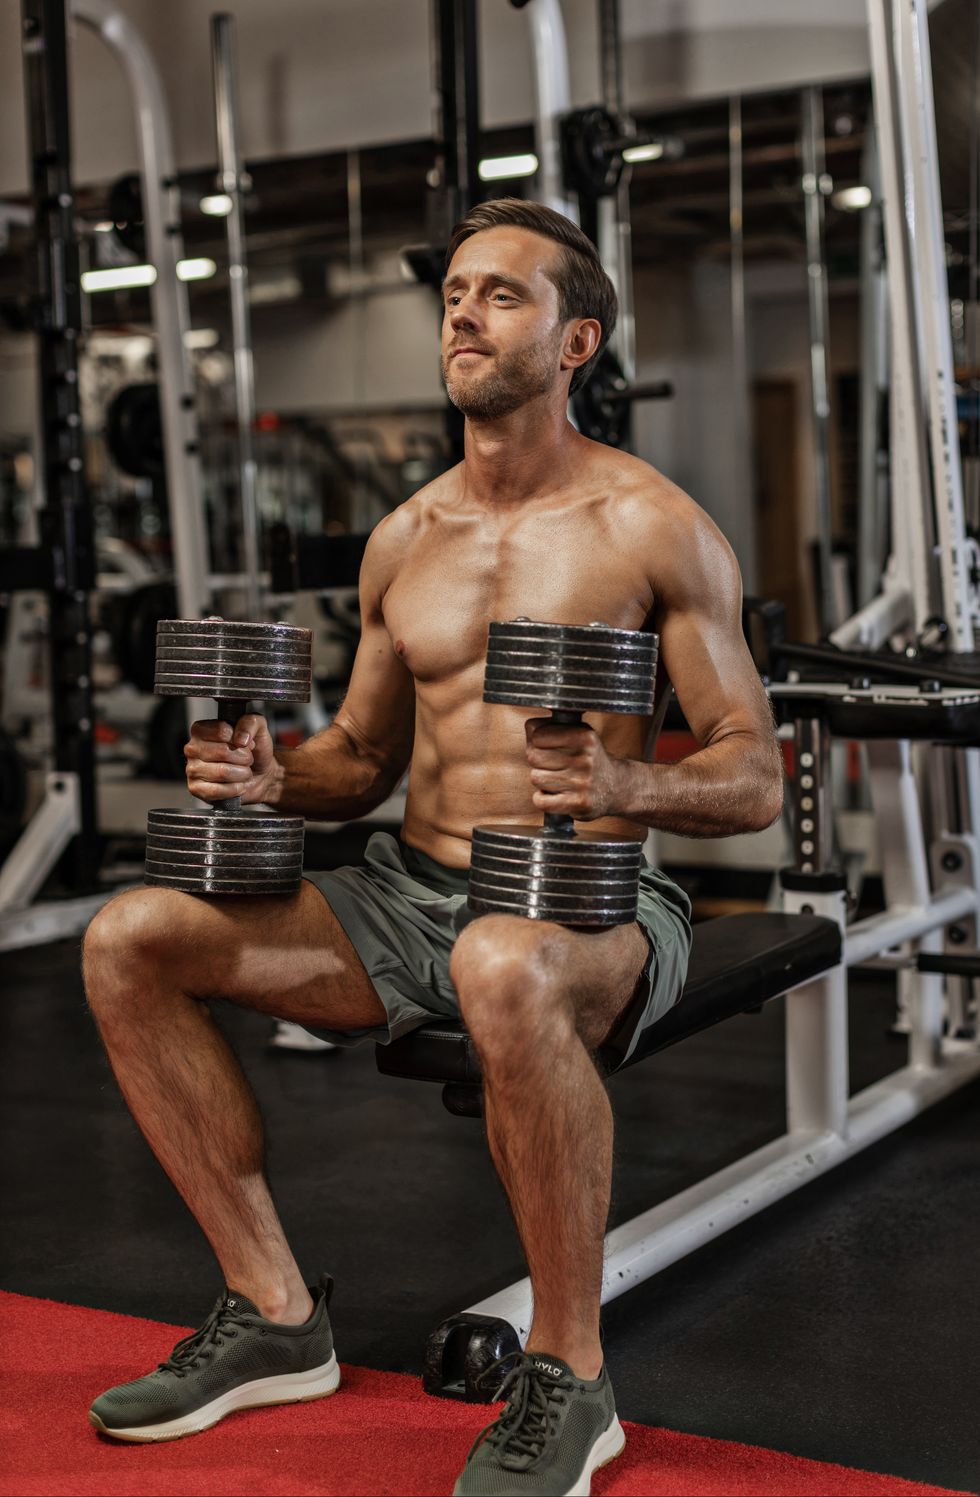 sitting down holding two dumbbells